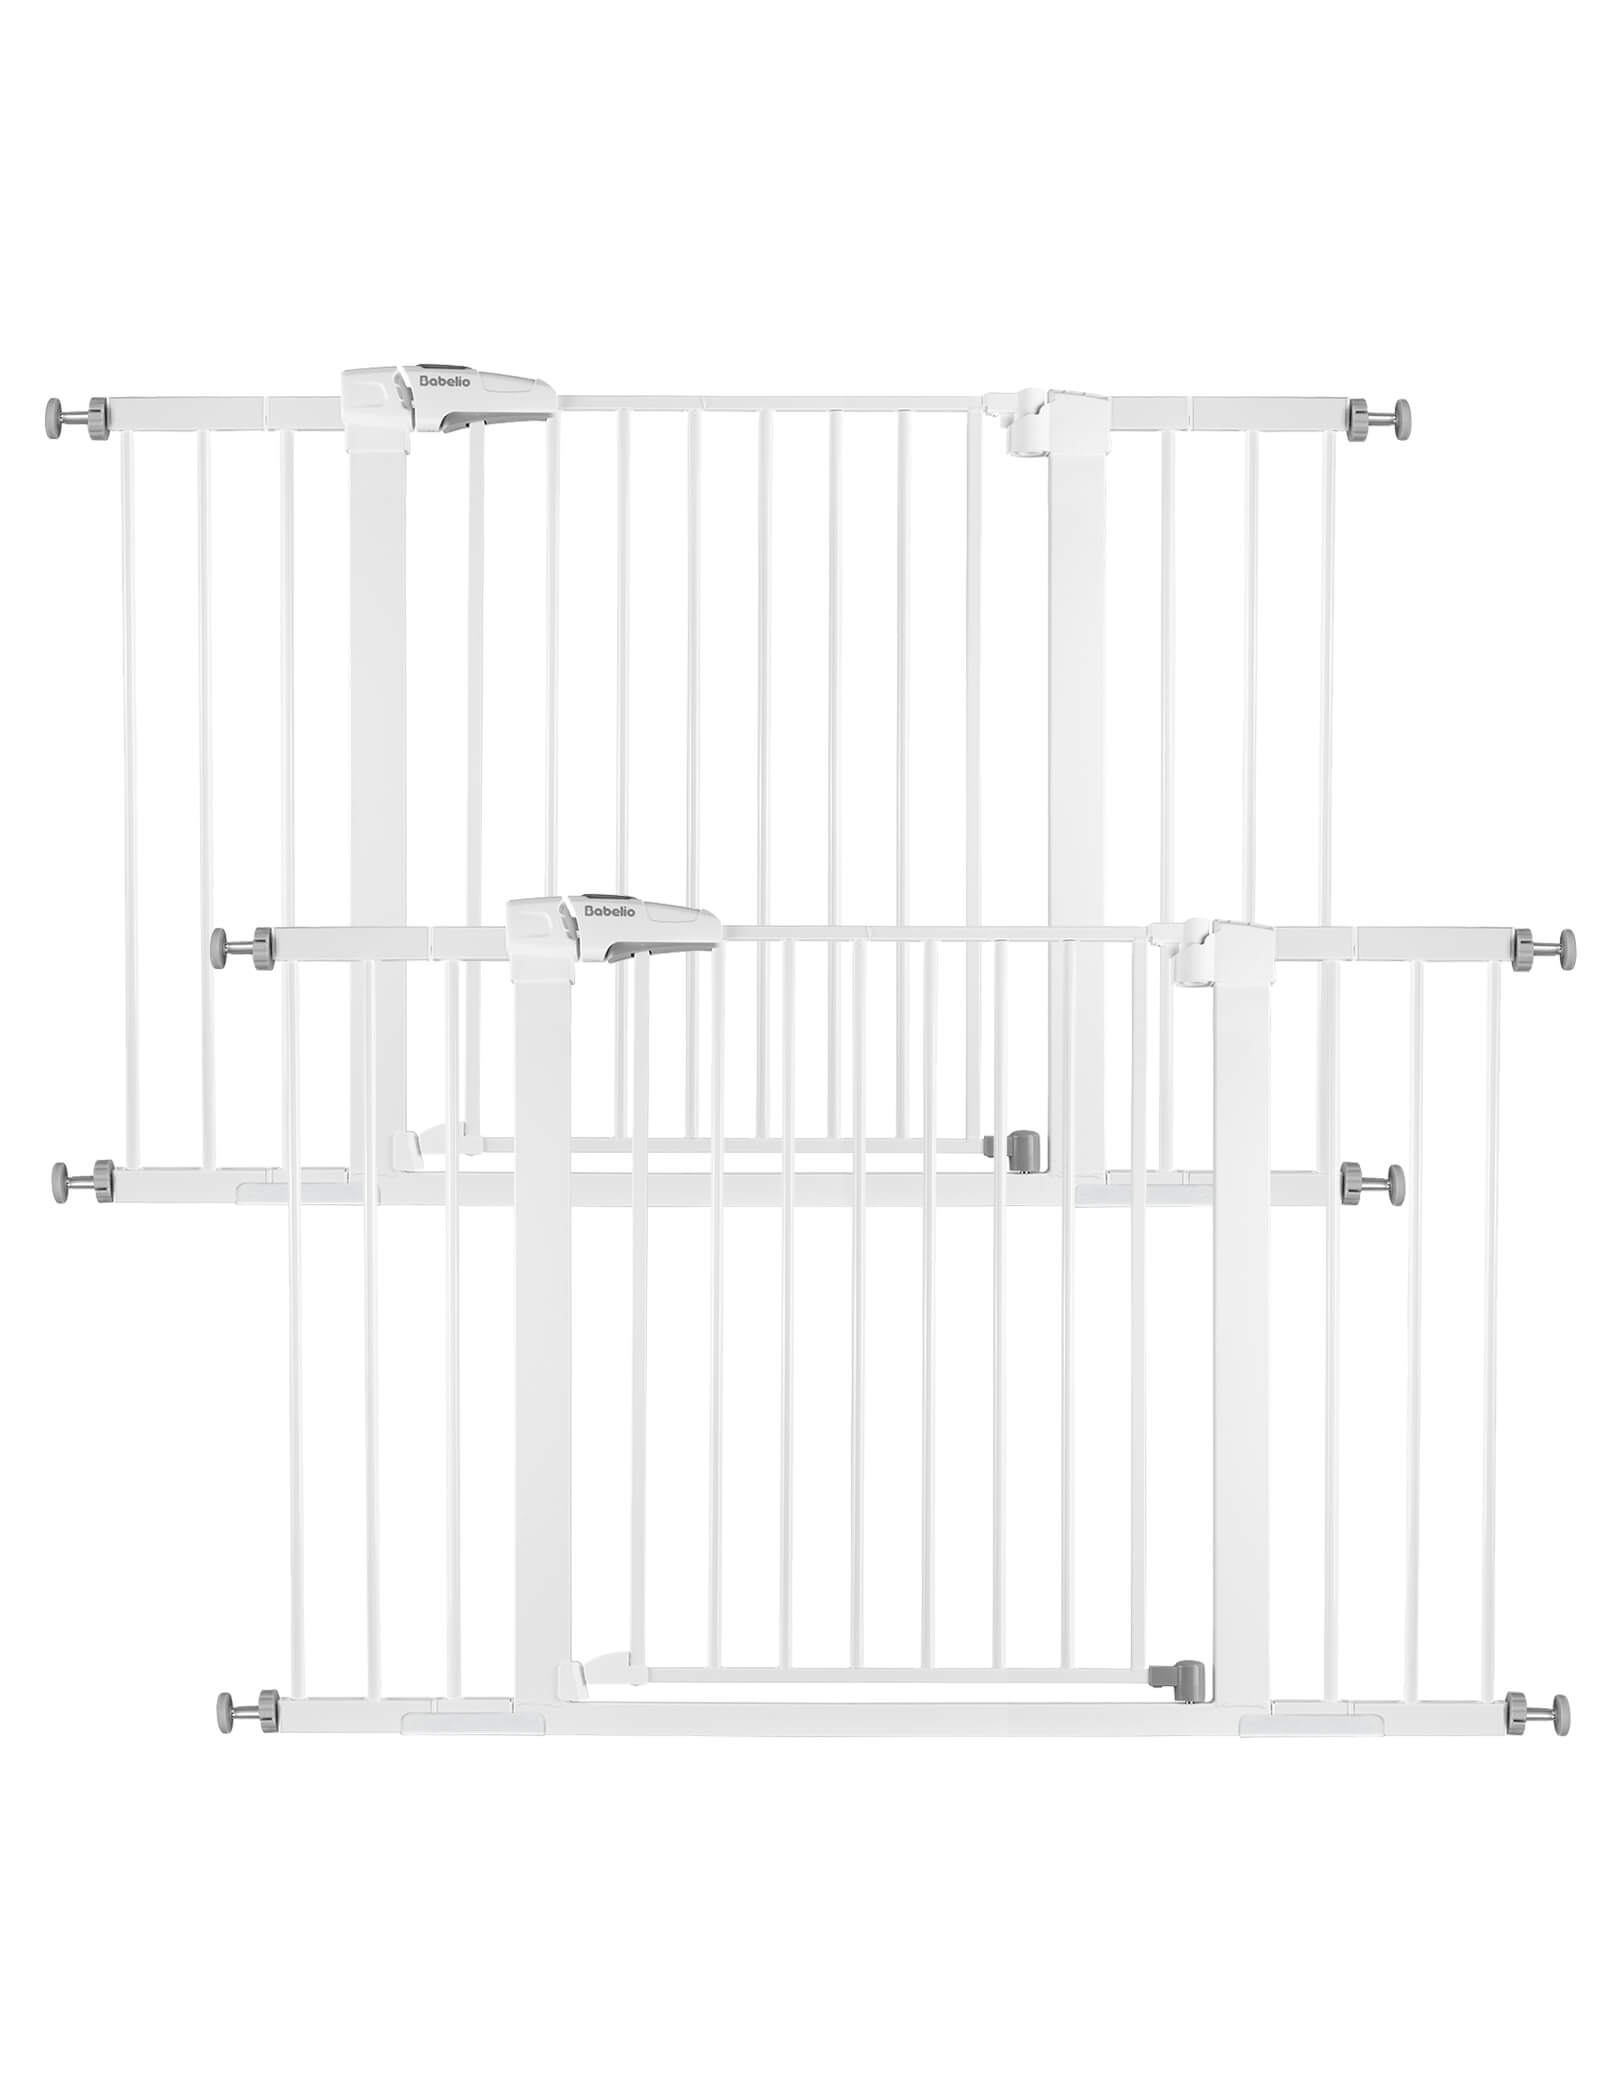 Babelio 29-55" Wide All-Steel Baby Gate – Easy Walk-Through, No-Drill Setup, Auto-Close, for Children and Pets